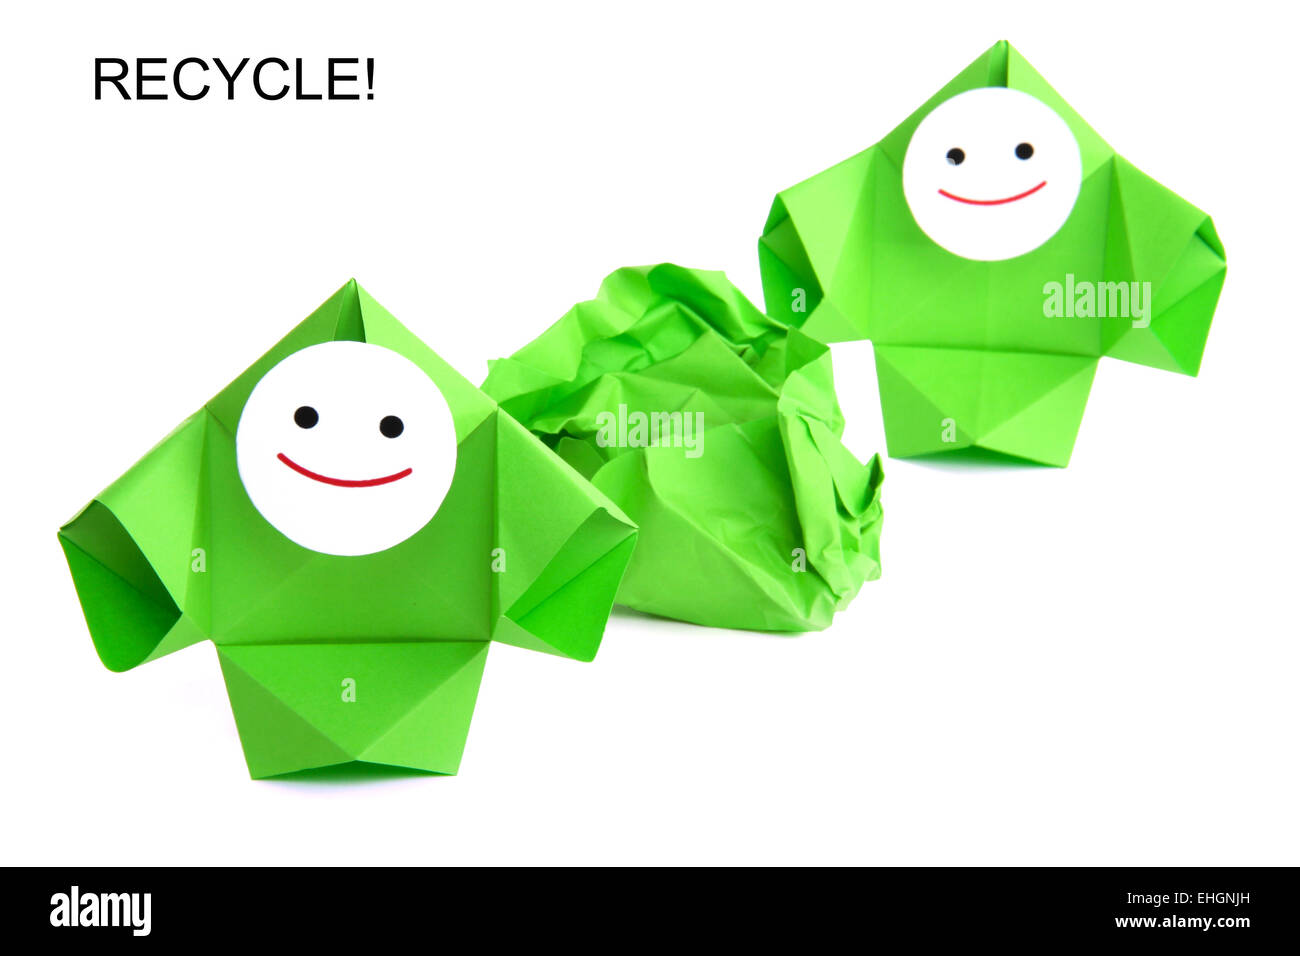 Conceptual image of recycling Stock Photo